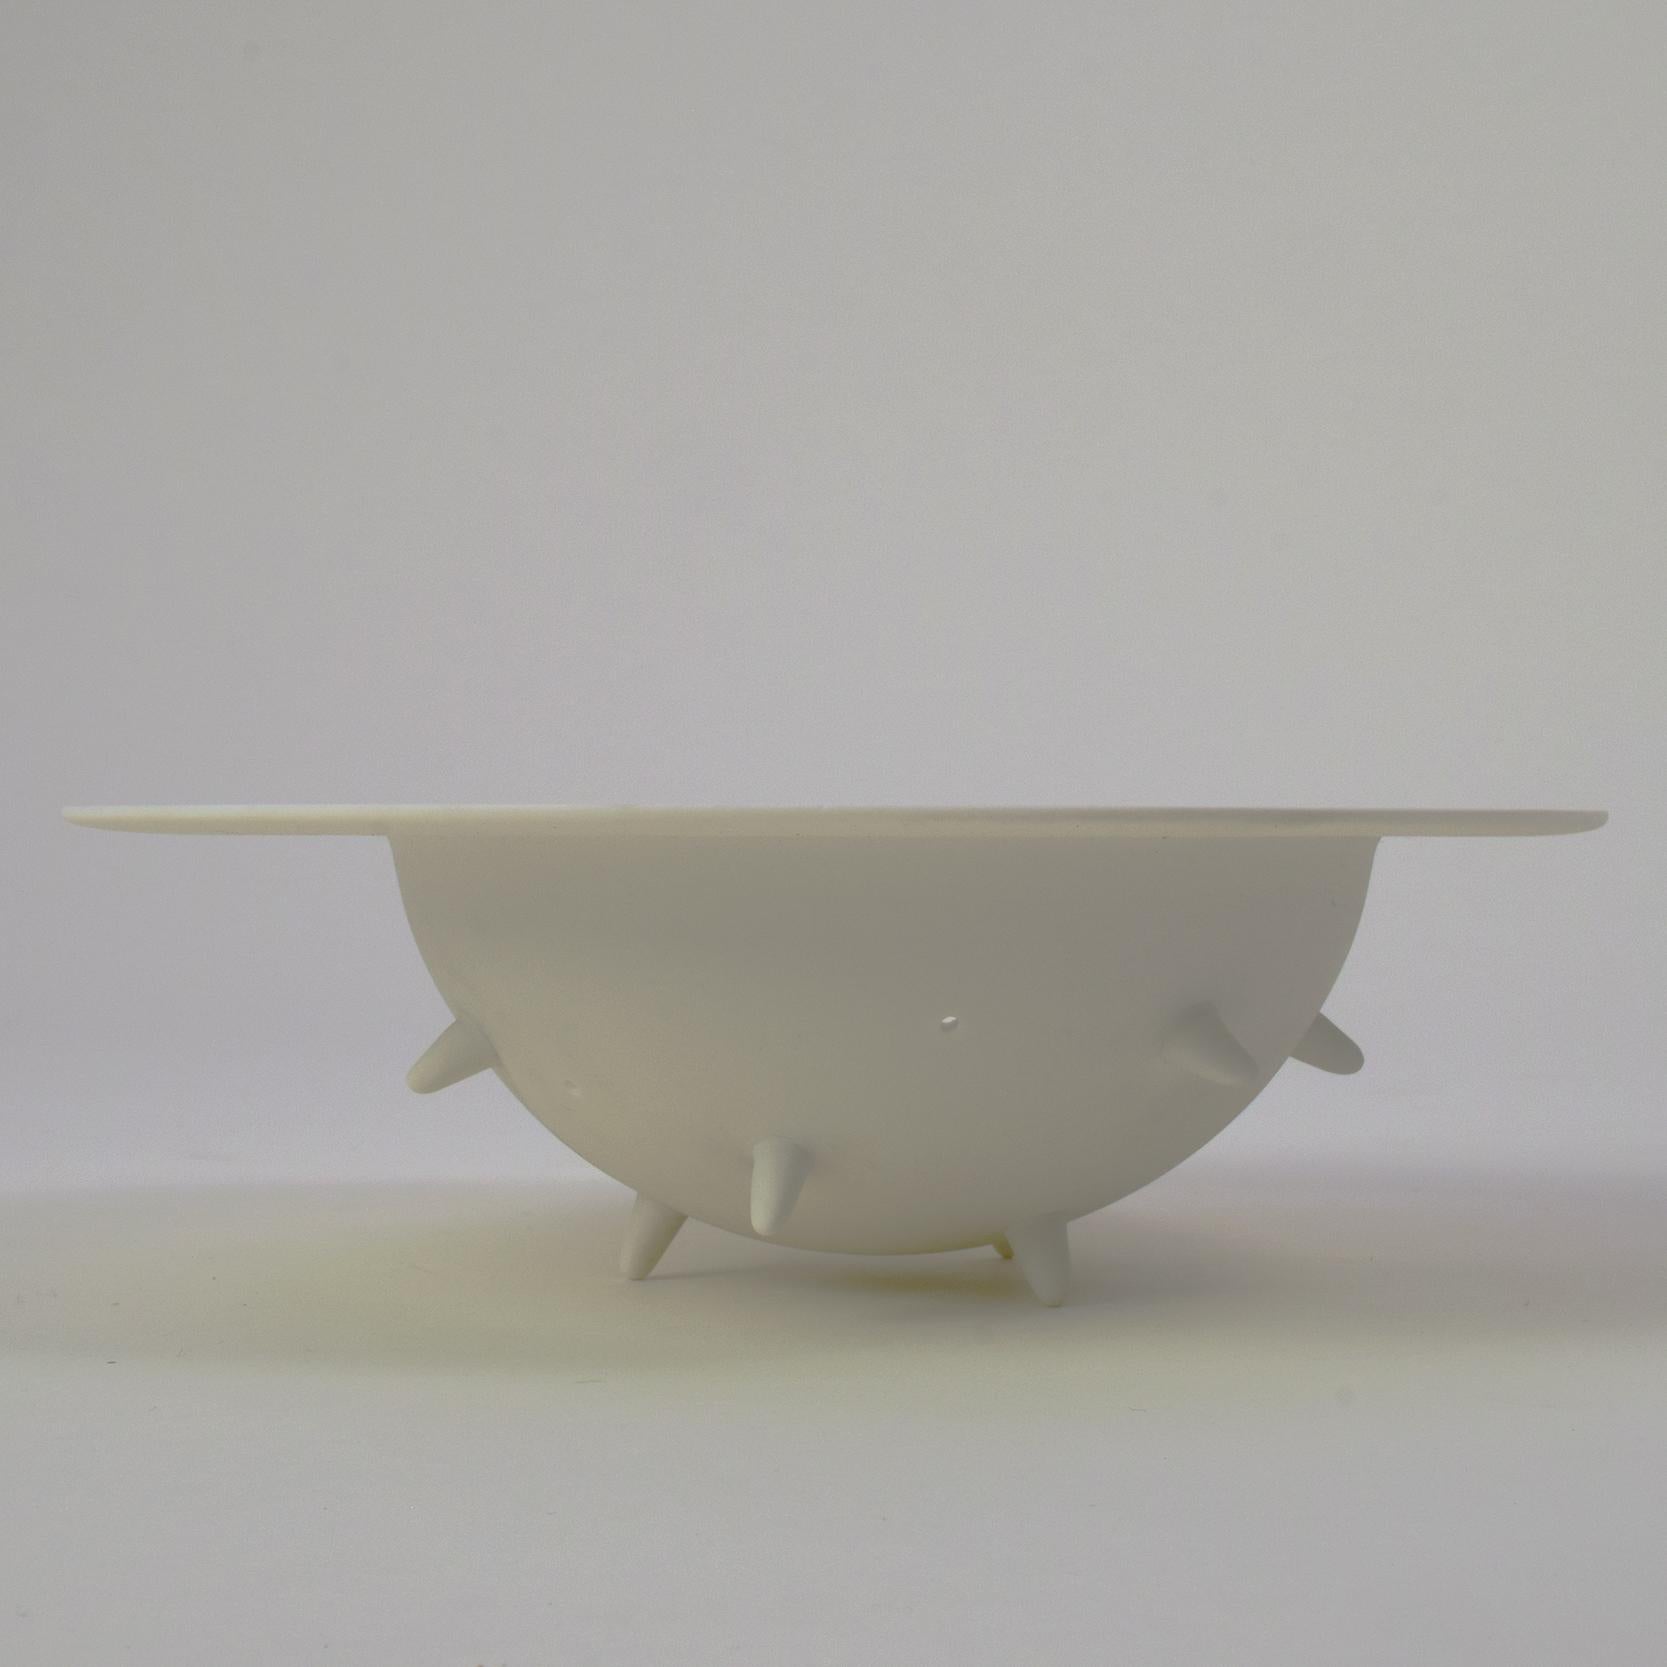 Alison Wilding, Ceramic Sculpture 'Bowl or Art Object', 1999 for Tate Gallery For Sale 1